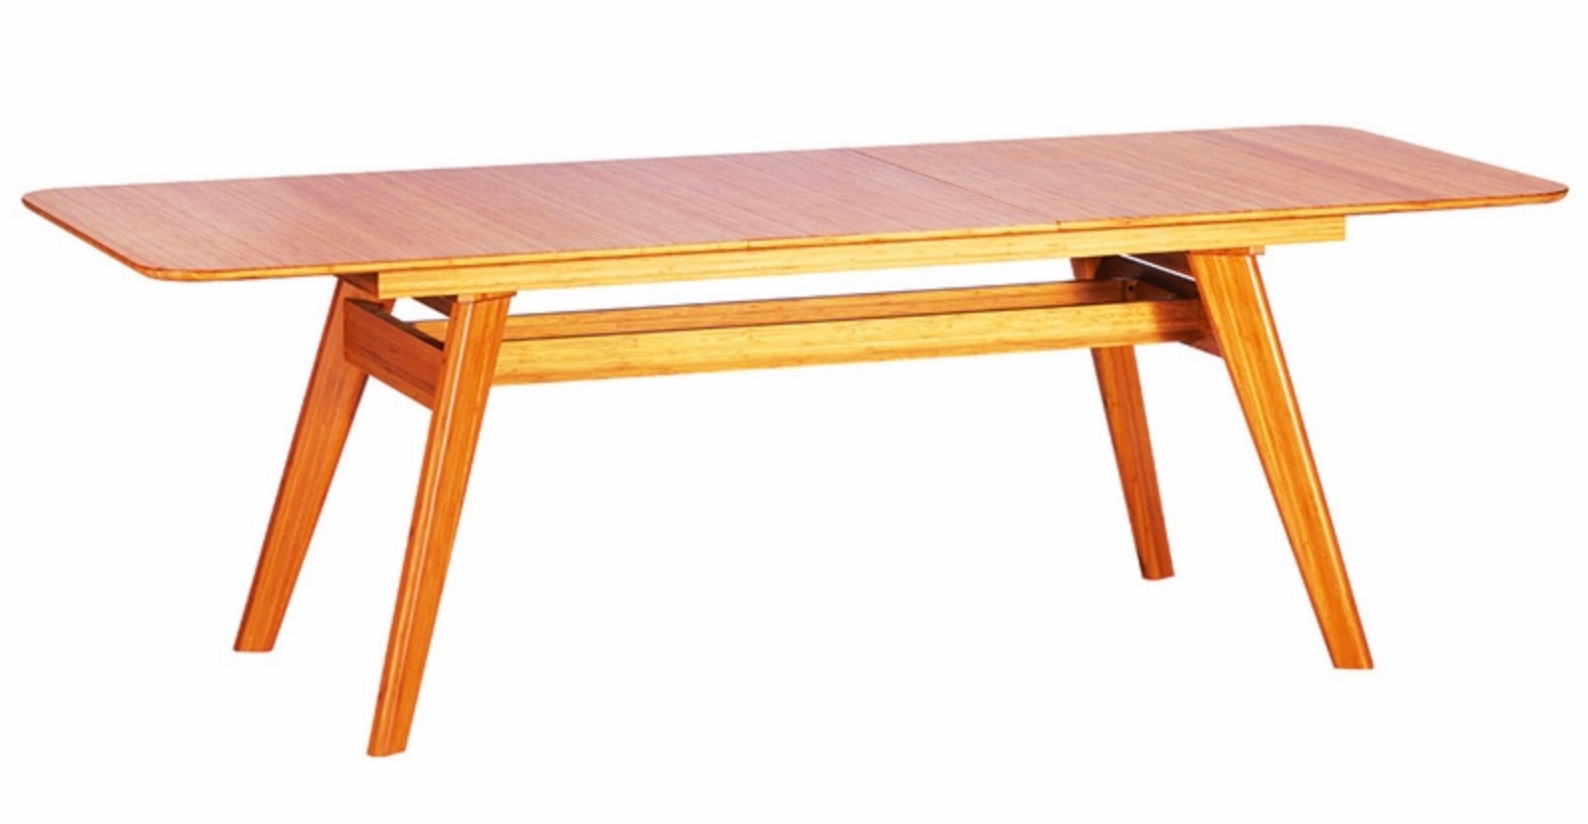 The Eco-Friendly Currant Extension Dining Table